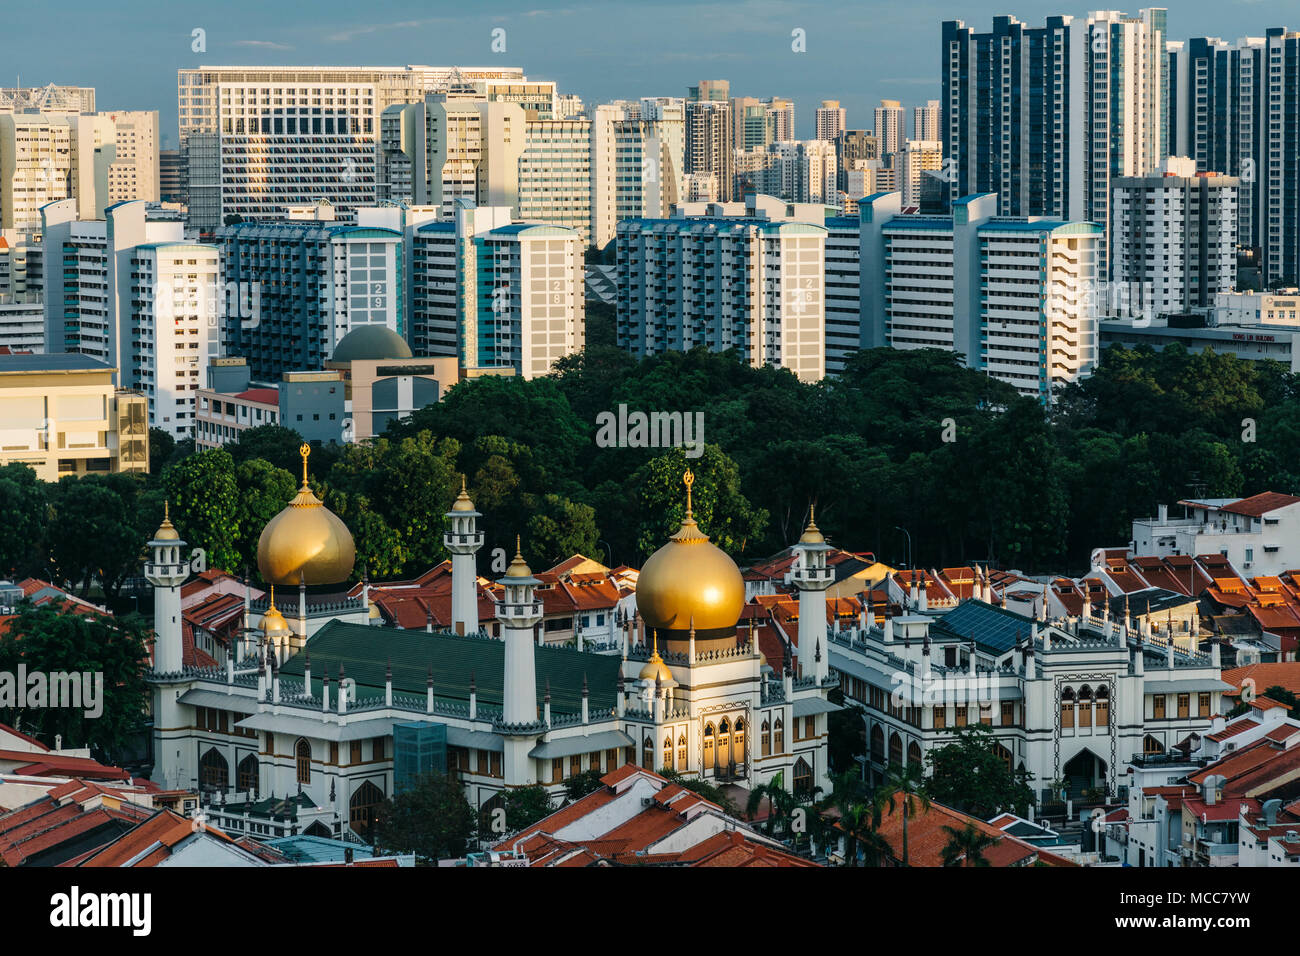 Aerial view of Kampong Glam district, Singapore Stock Photo